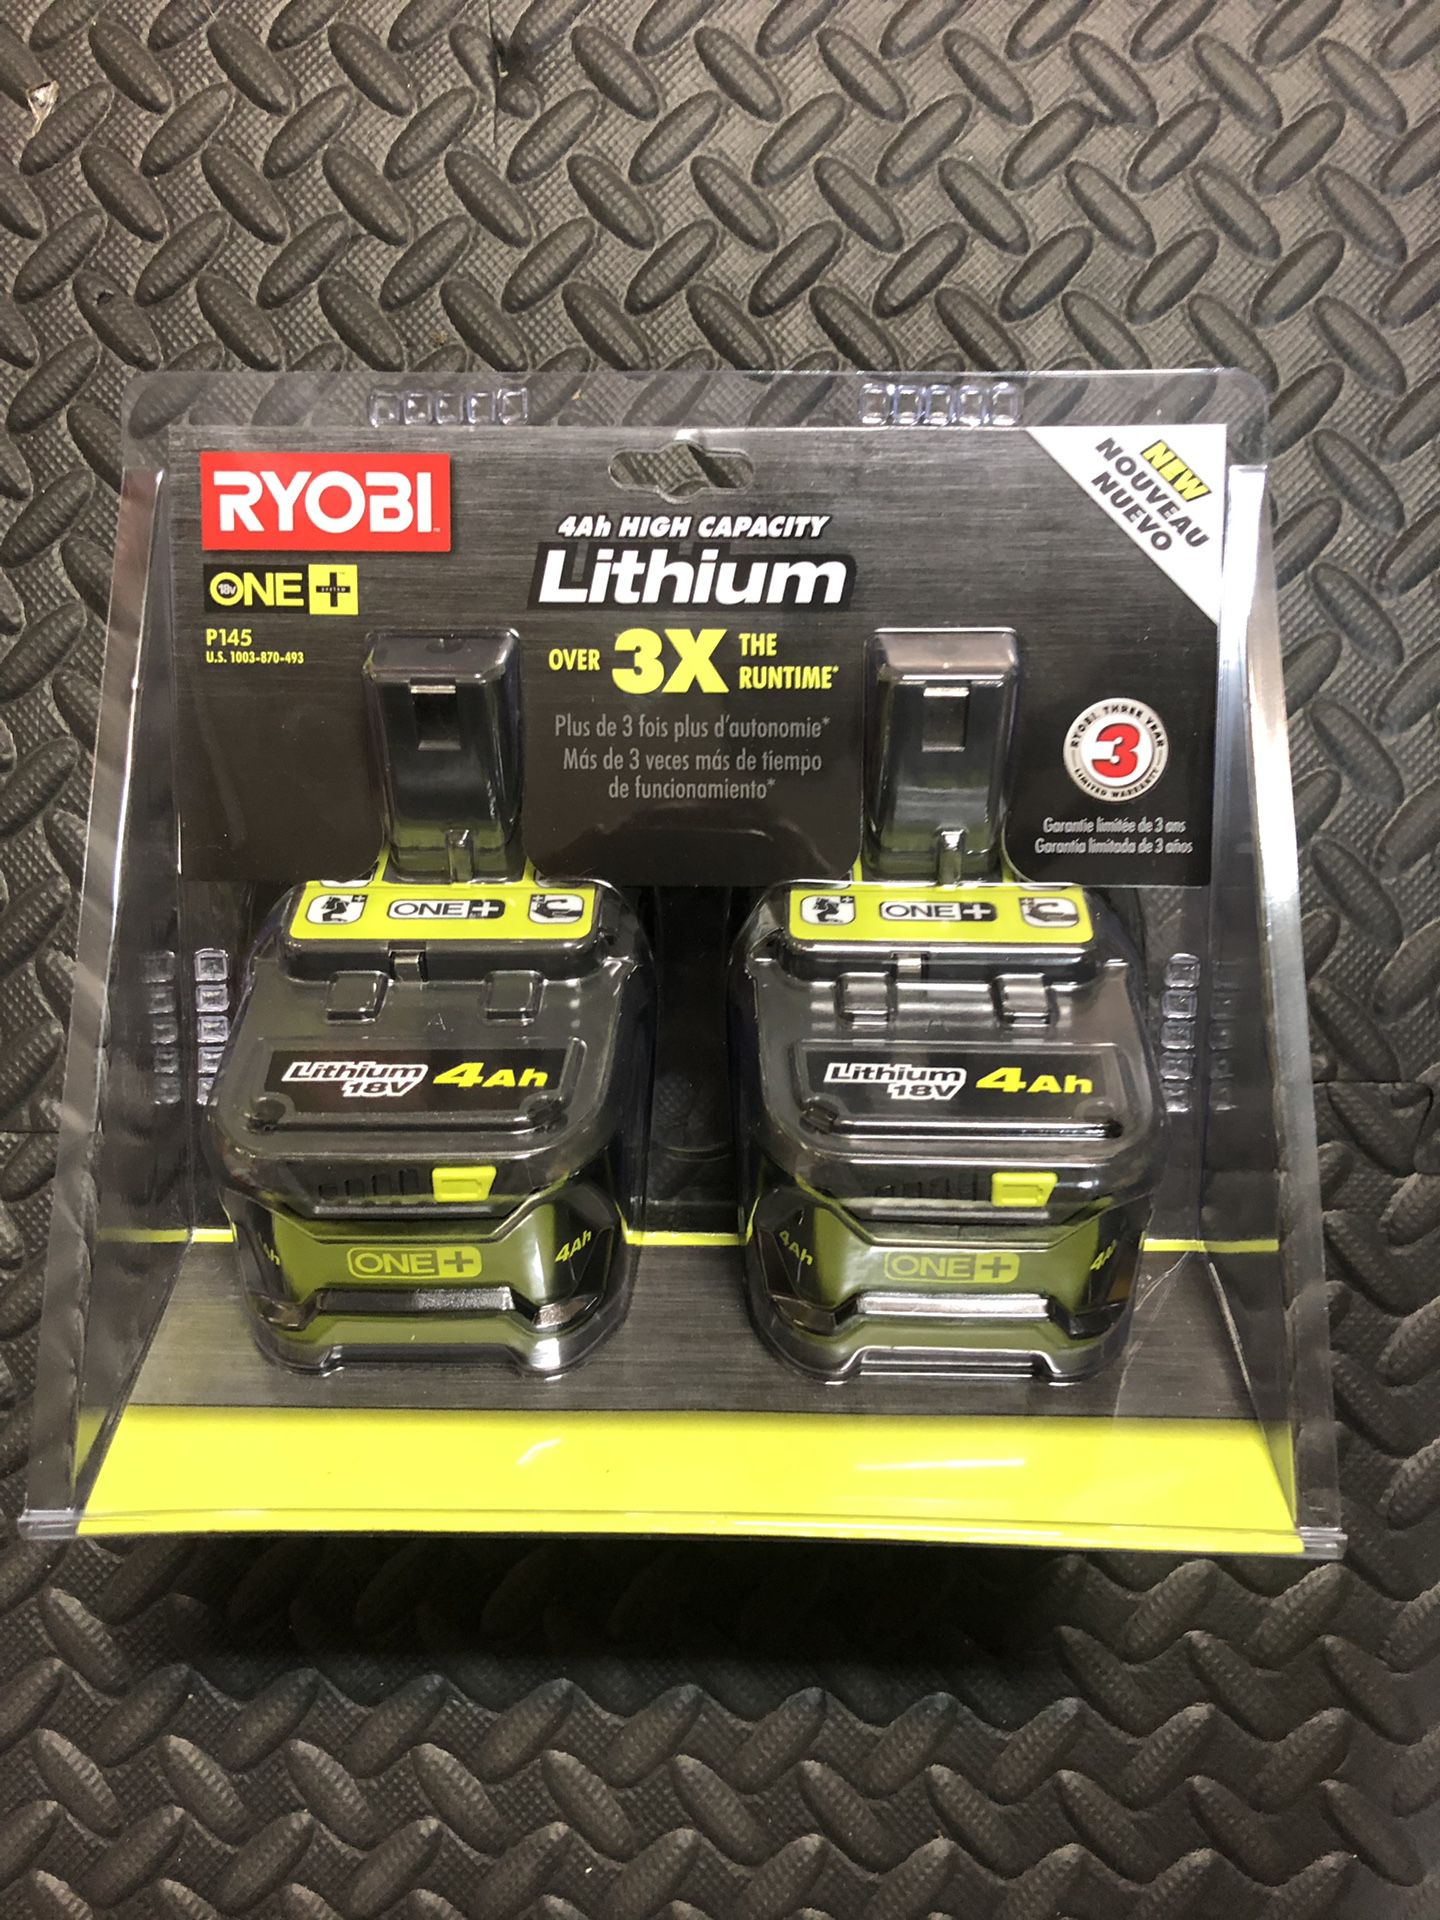 RYOBI 18-Volt ONE+ Lithium-Ion Battery Pack 4.0 Ah (2-Pack) Sealed in Package